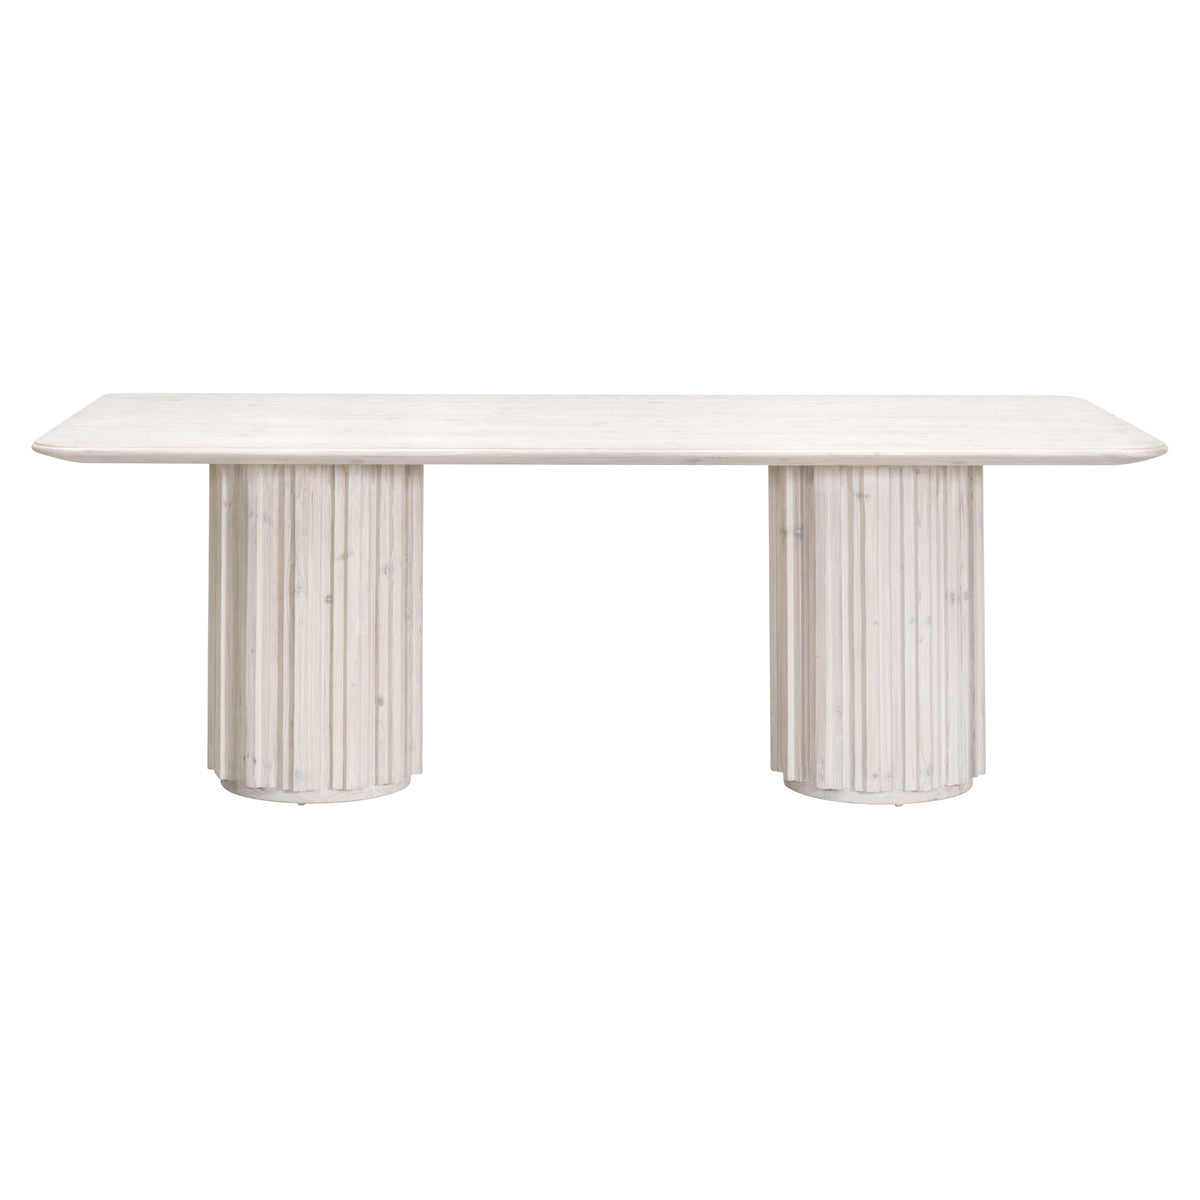 ROMA DINING TABLE